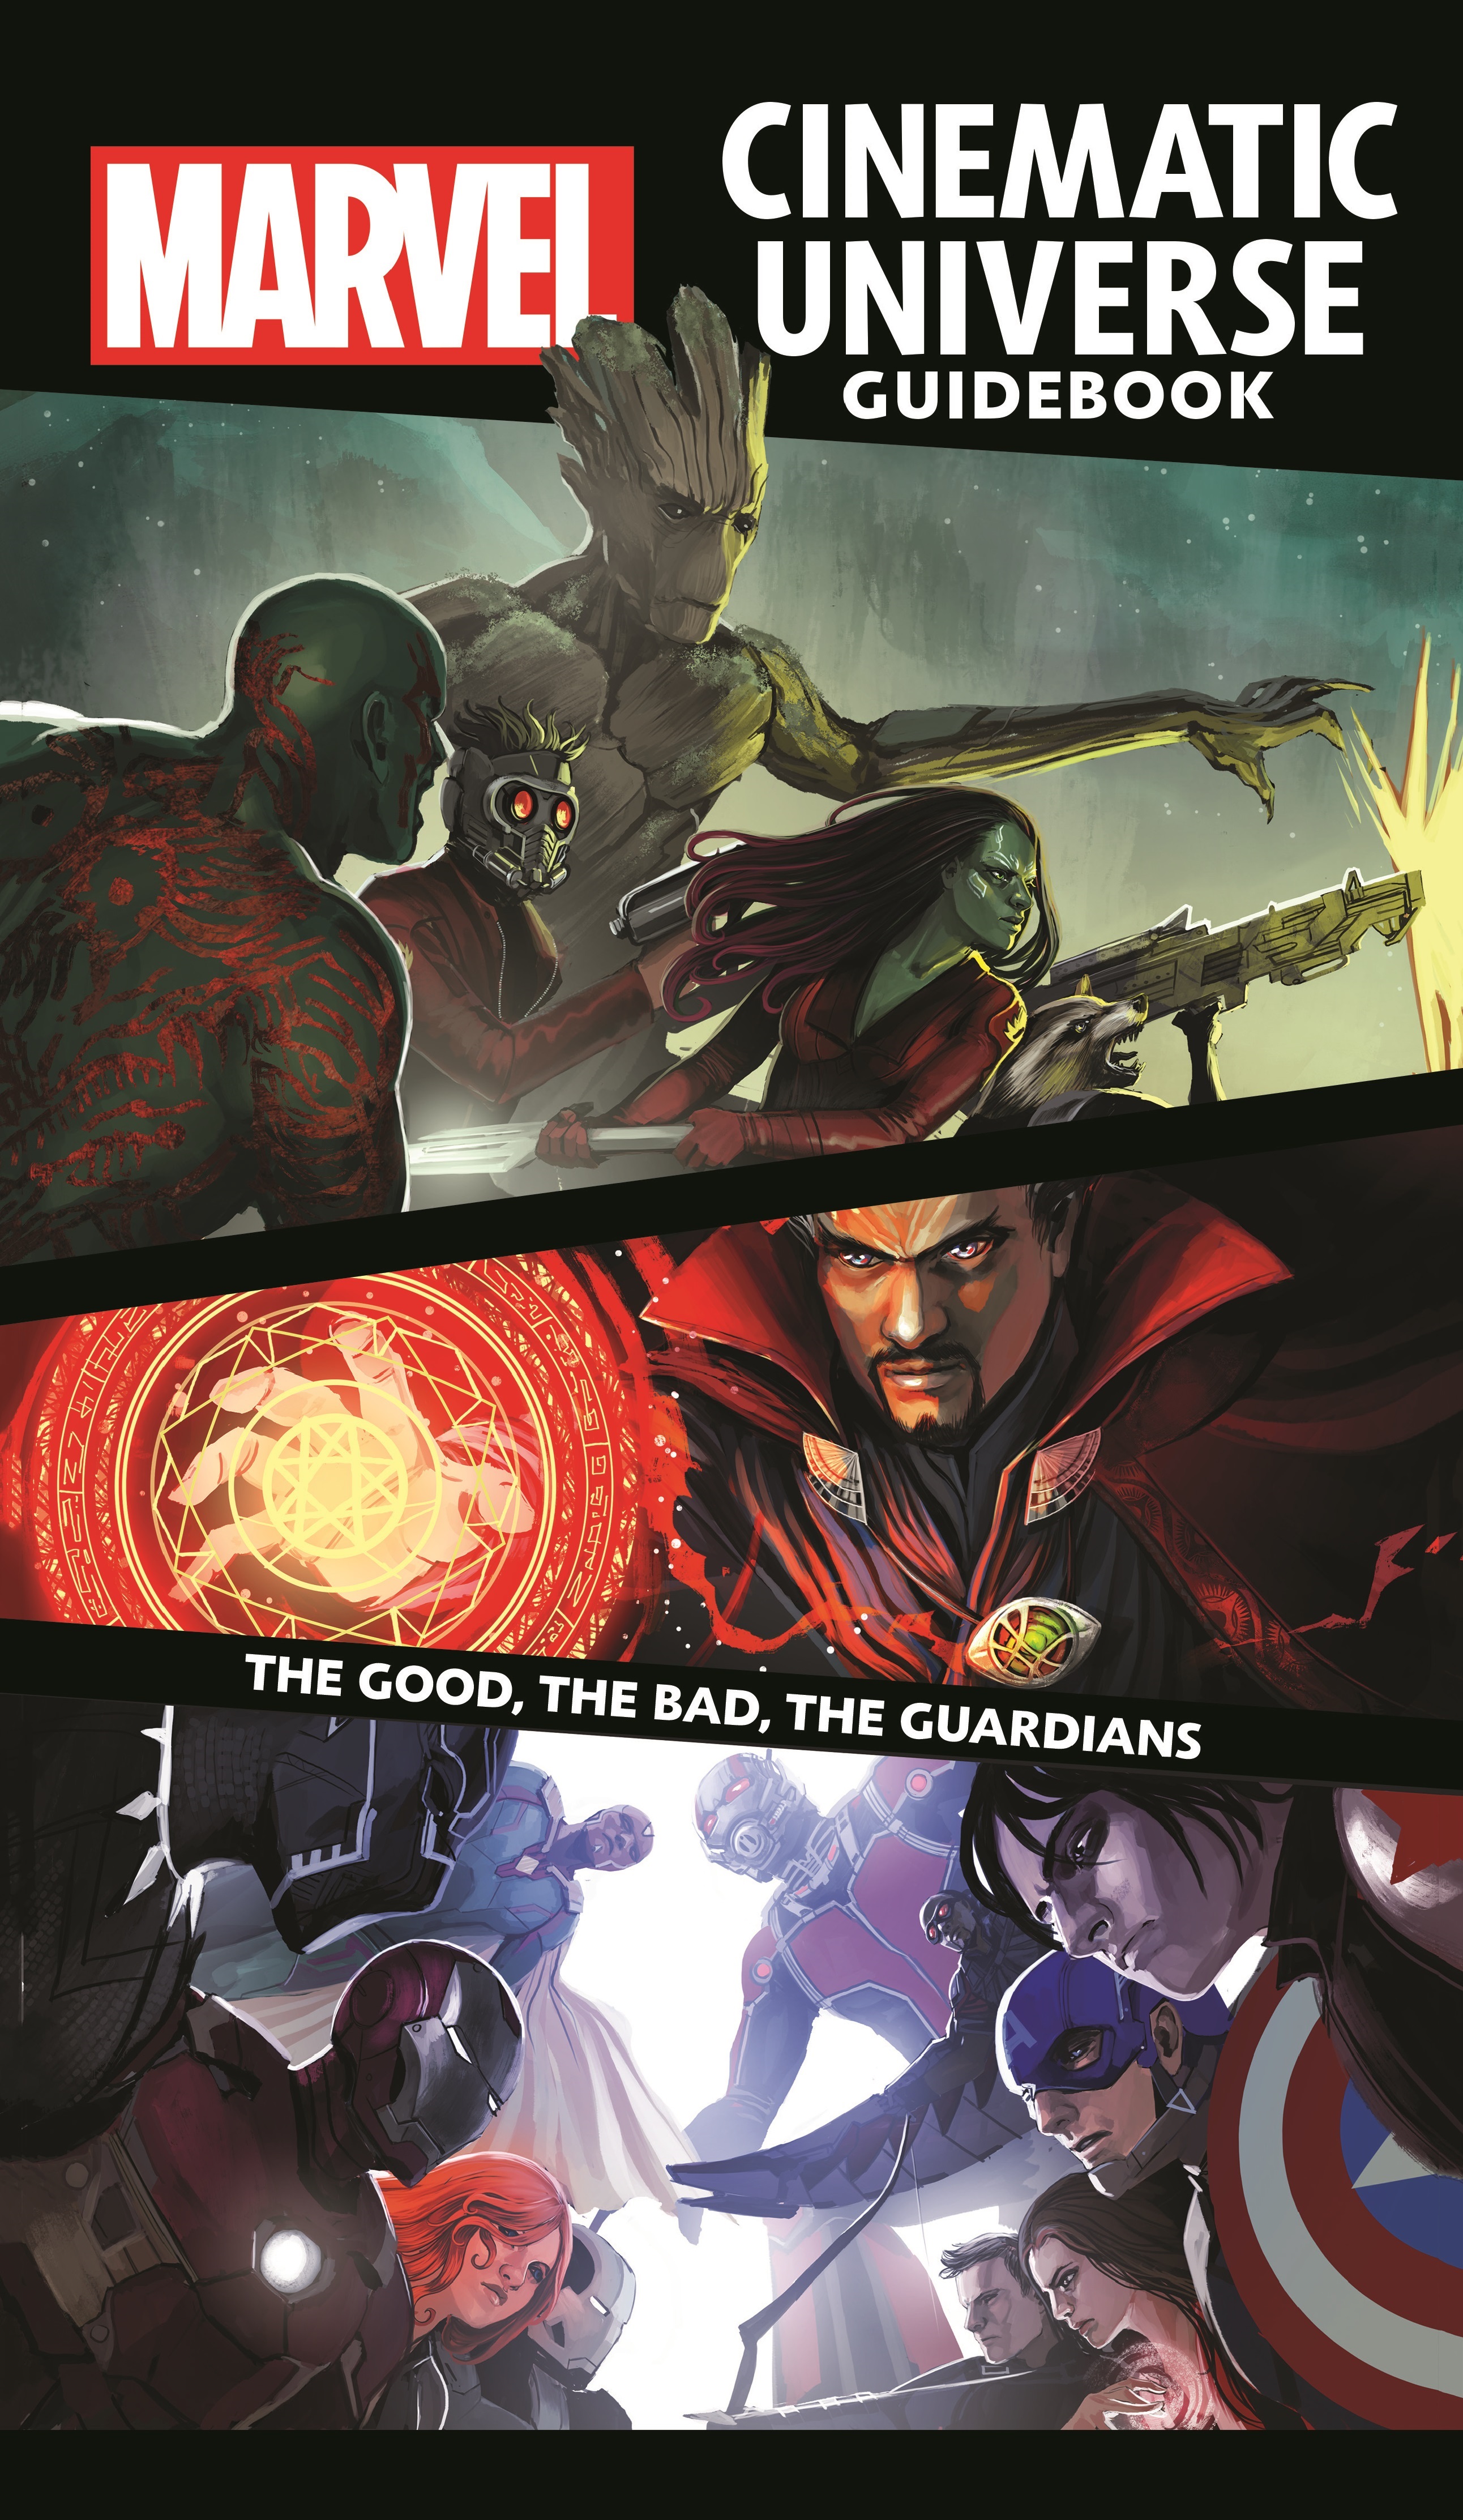 MARVEL CINEMATIC UNIVERSE GUIDEBOOK: THE GOOD, THE BAD, THE GUARDIANS HC (Hardcover)